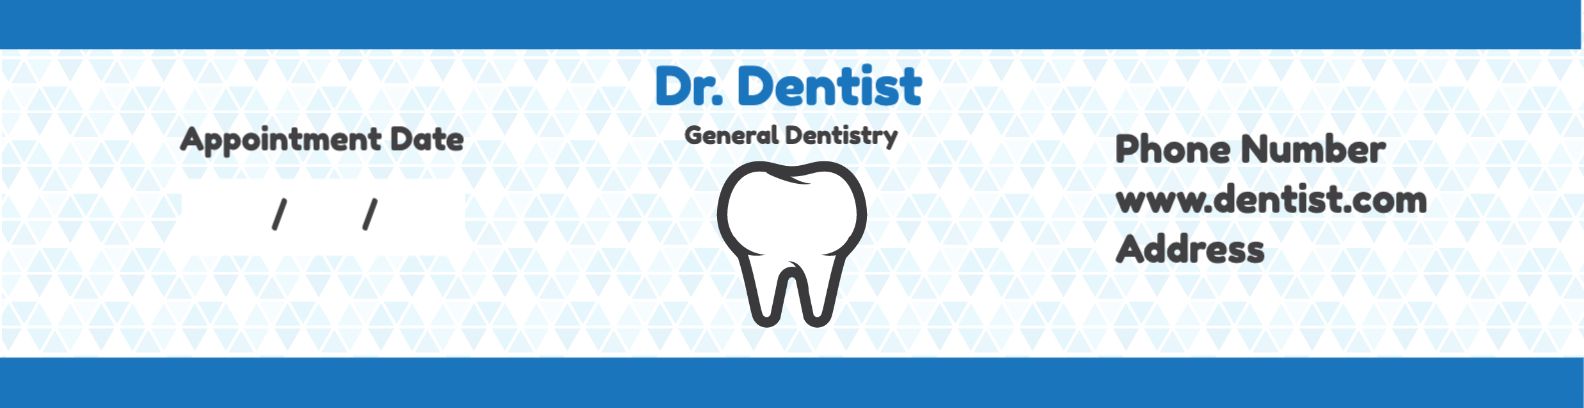 Simple Dentistry Template